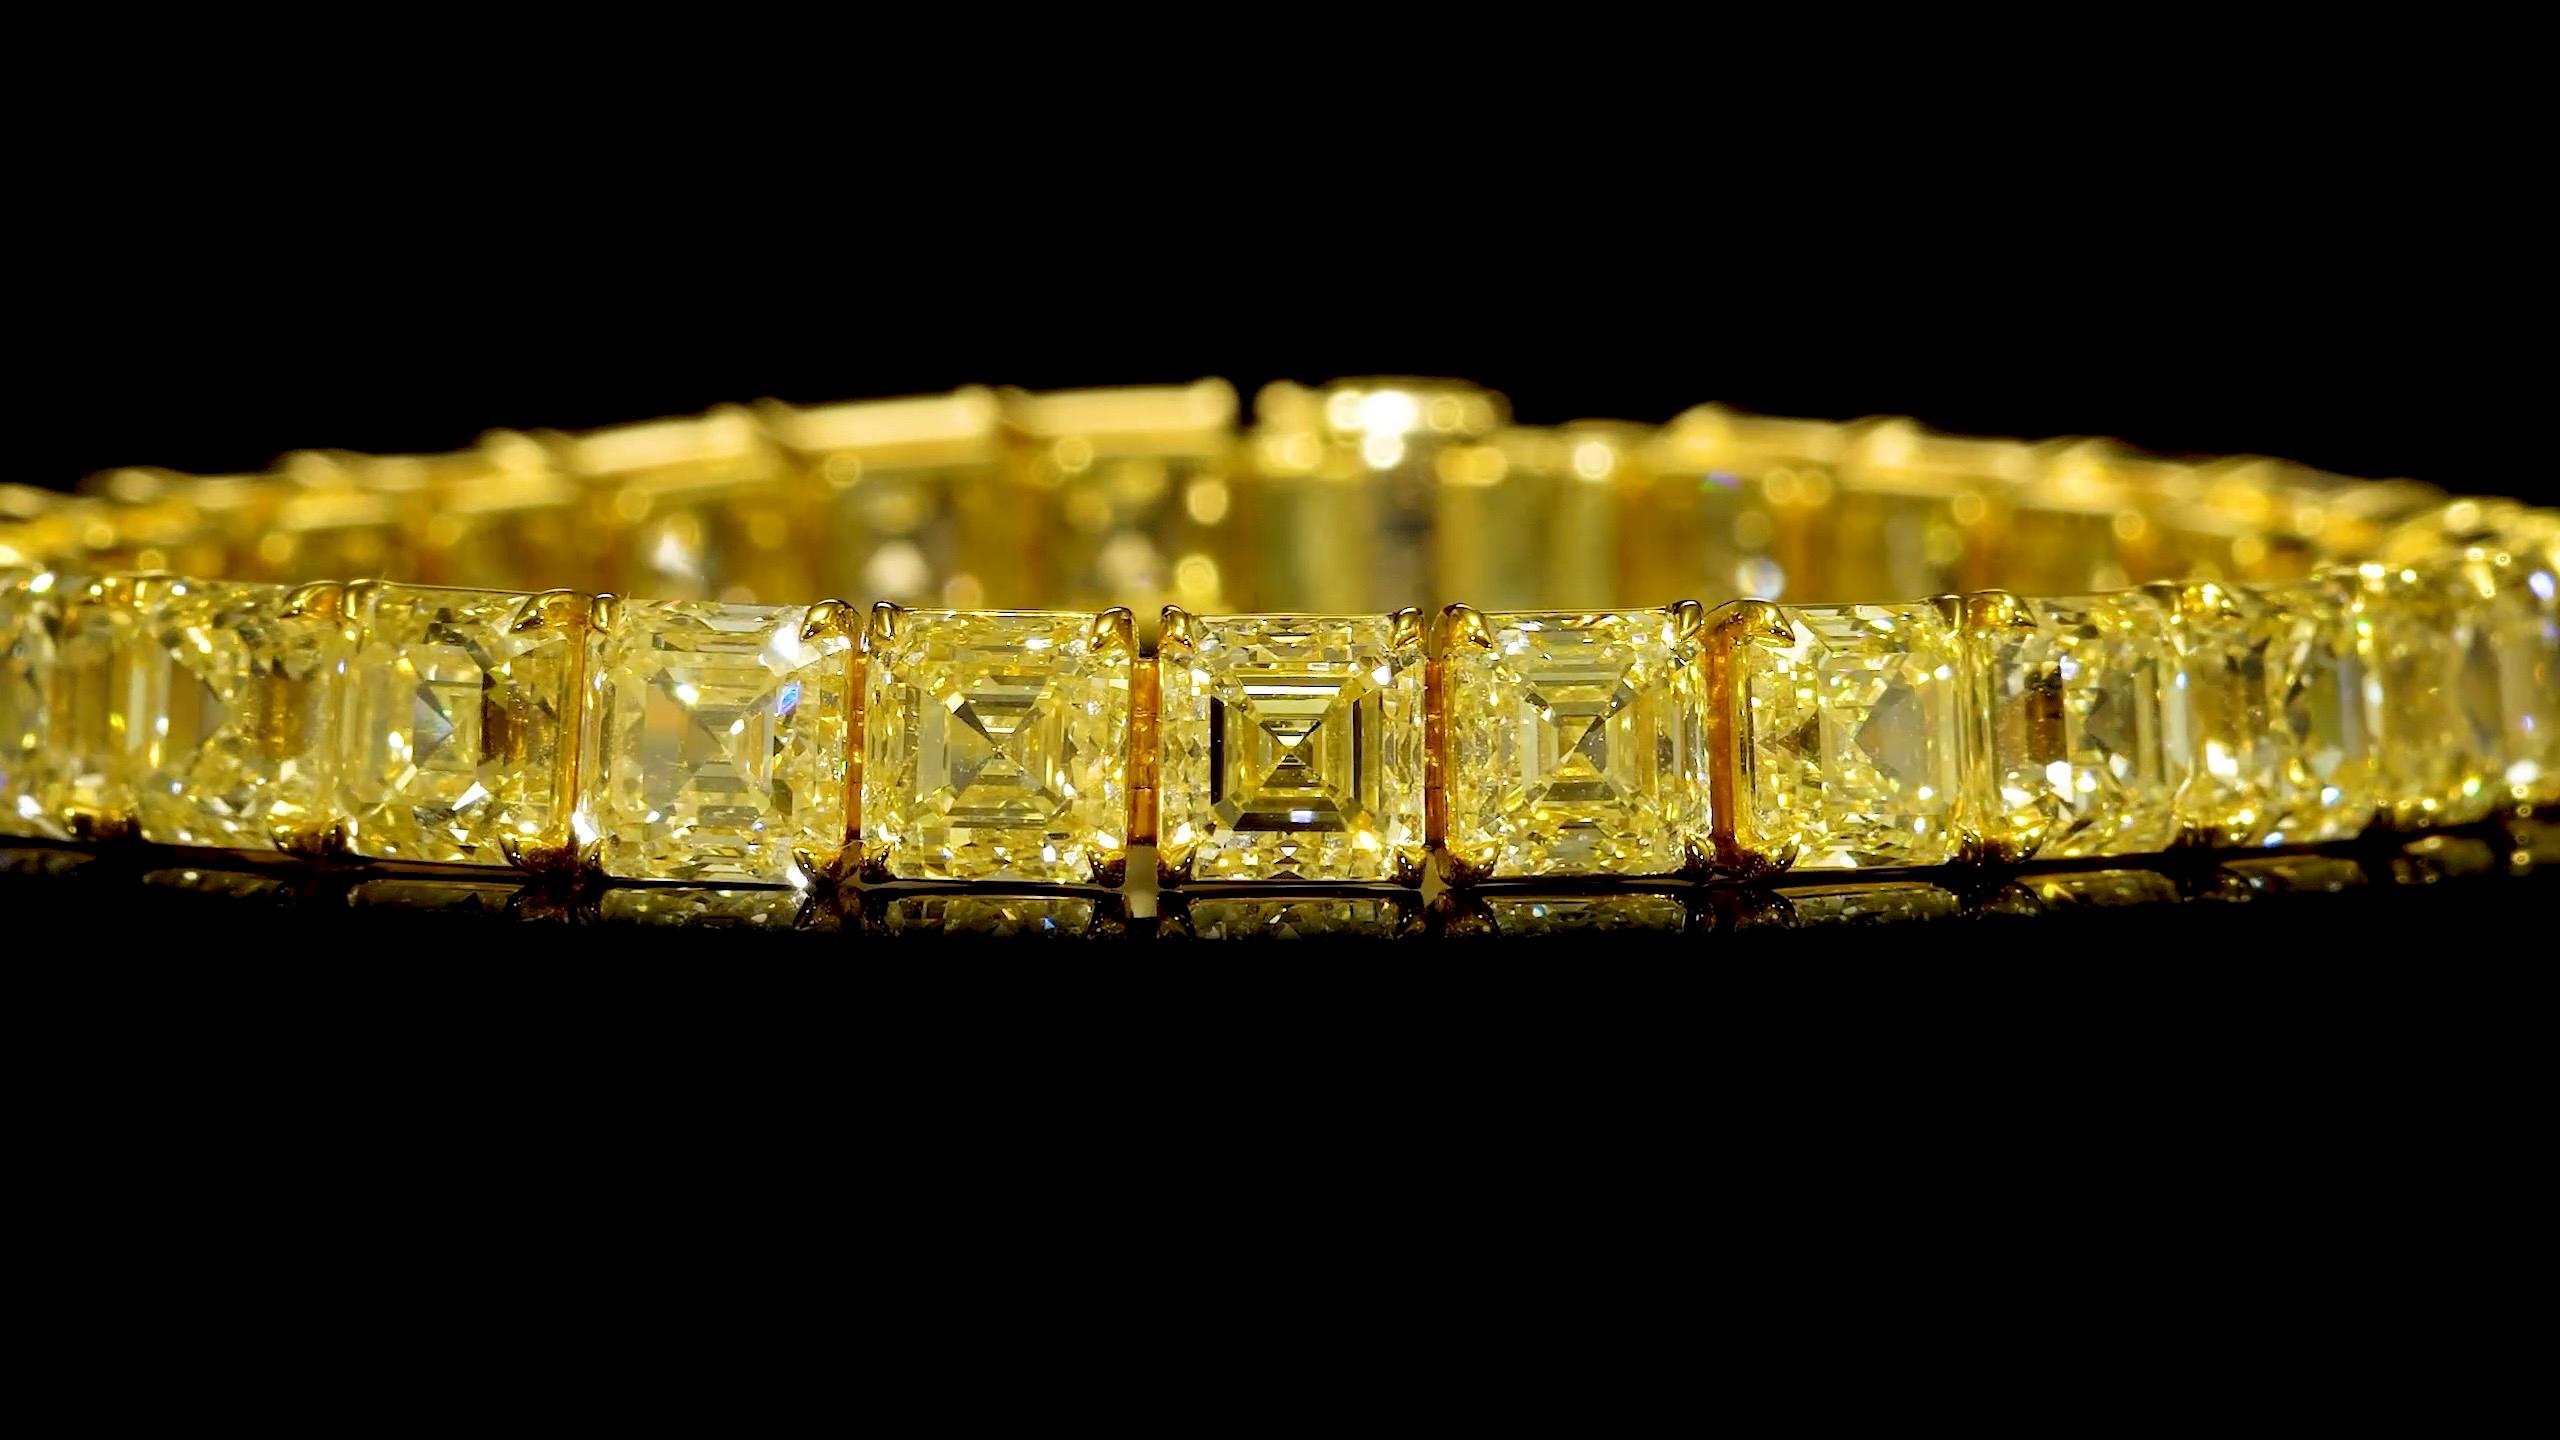 From the Museum Vault at Emilio Jewelry New York,

Super Rare Asscher Cut Canary Diamond bracelet. Each diamond is over 1.00 Carat. Please inquire for details. Asscher cuts are super rare when it comes to yellow diamonds, and this bracelet has 34 of